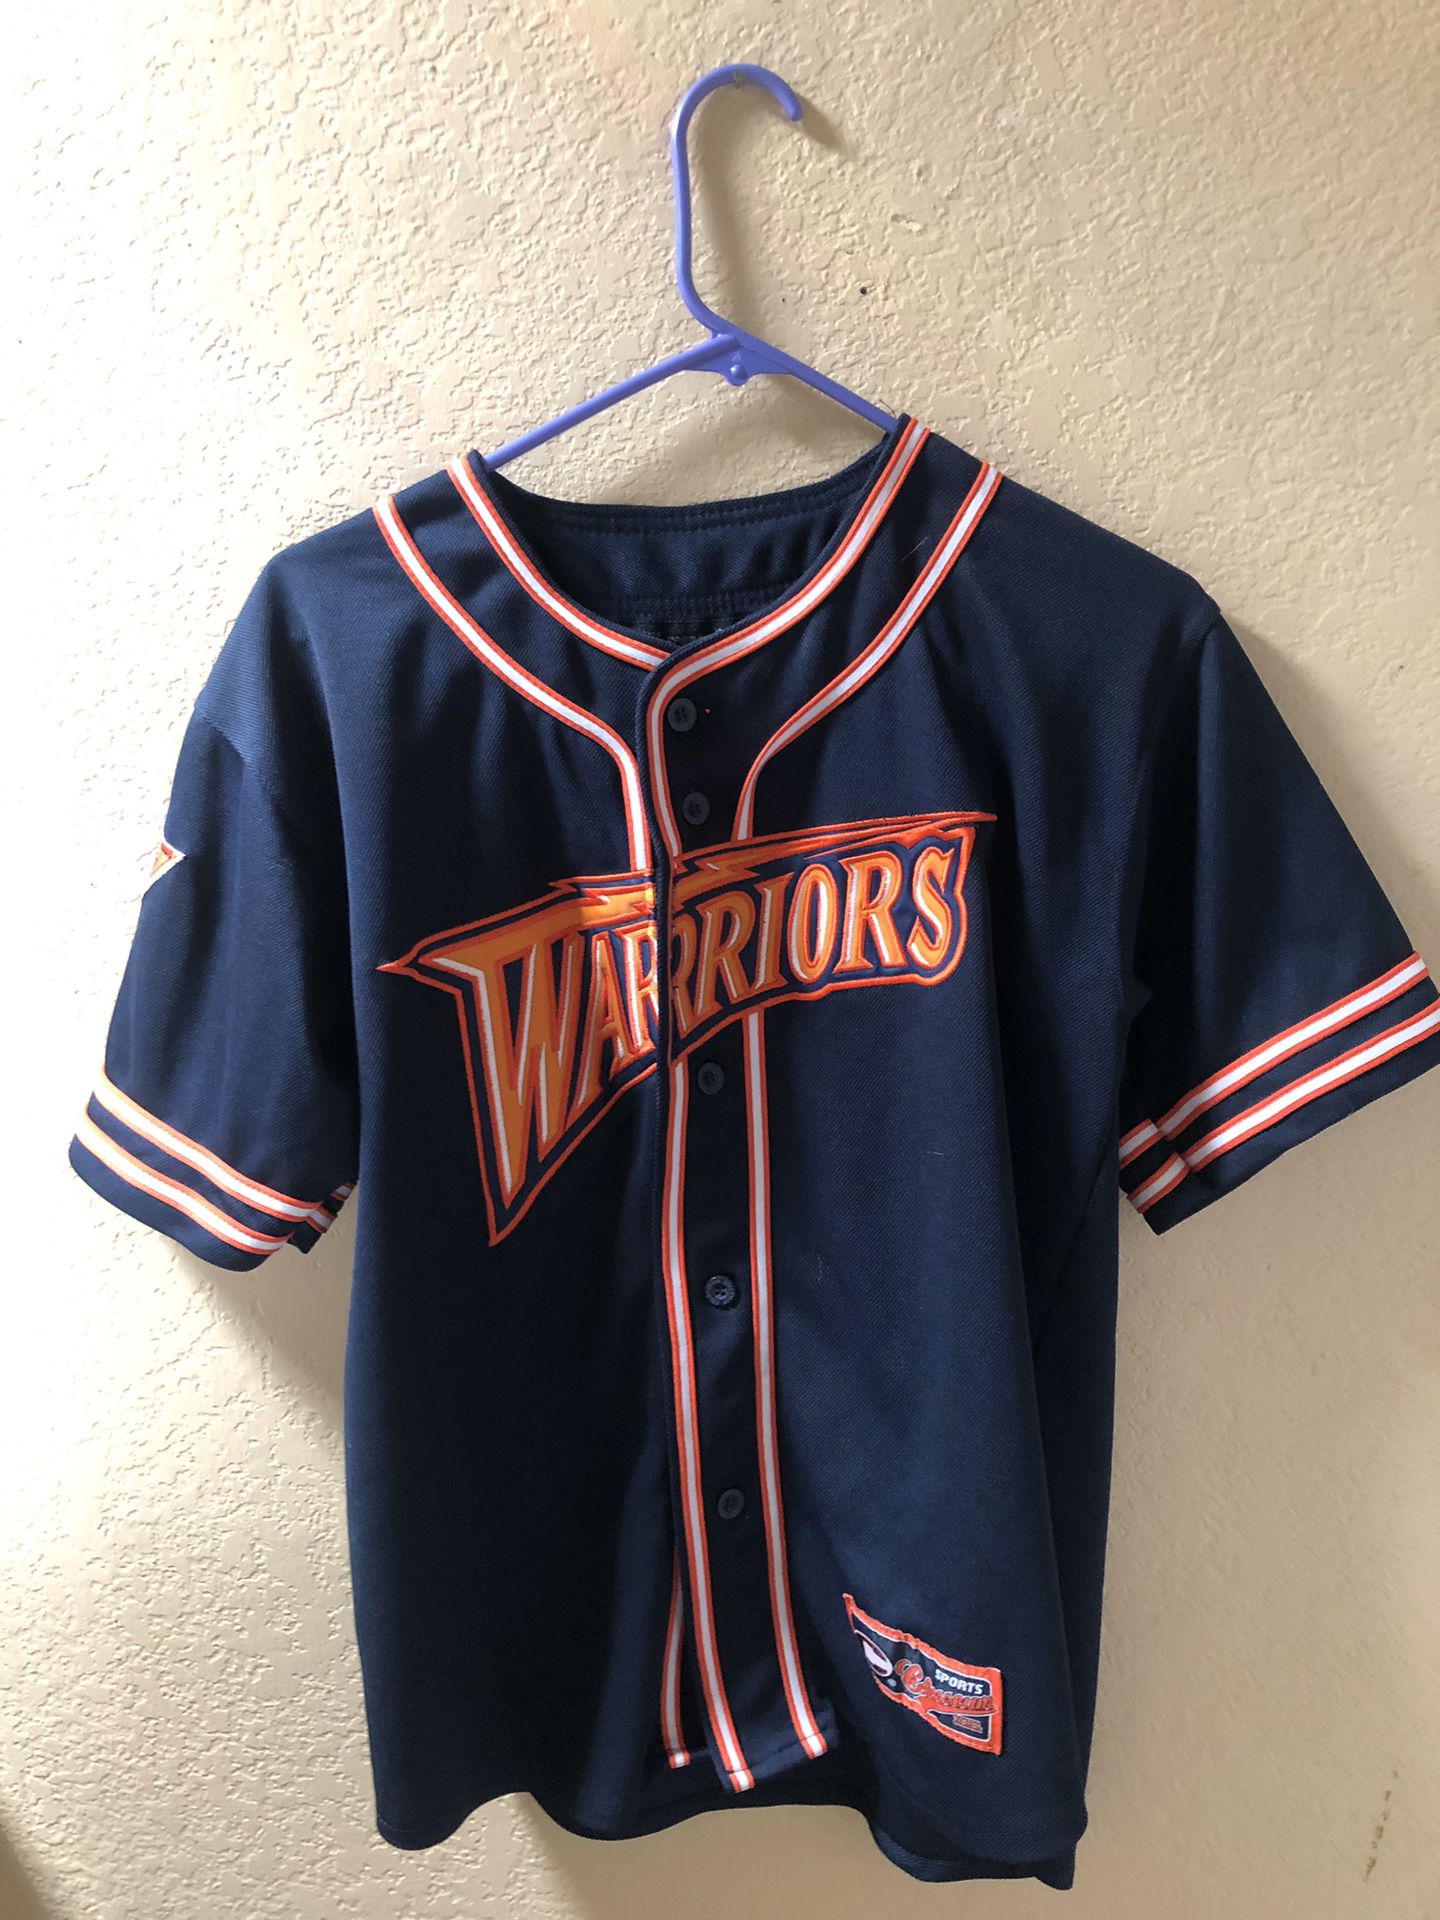 Golden State Warriors Jersey for Sale in Palo Alto, CA - OfferUp